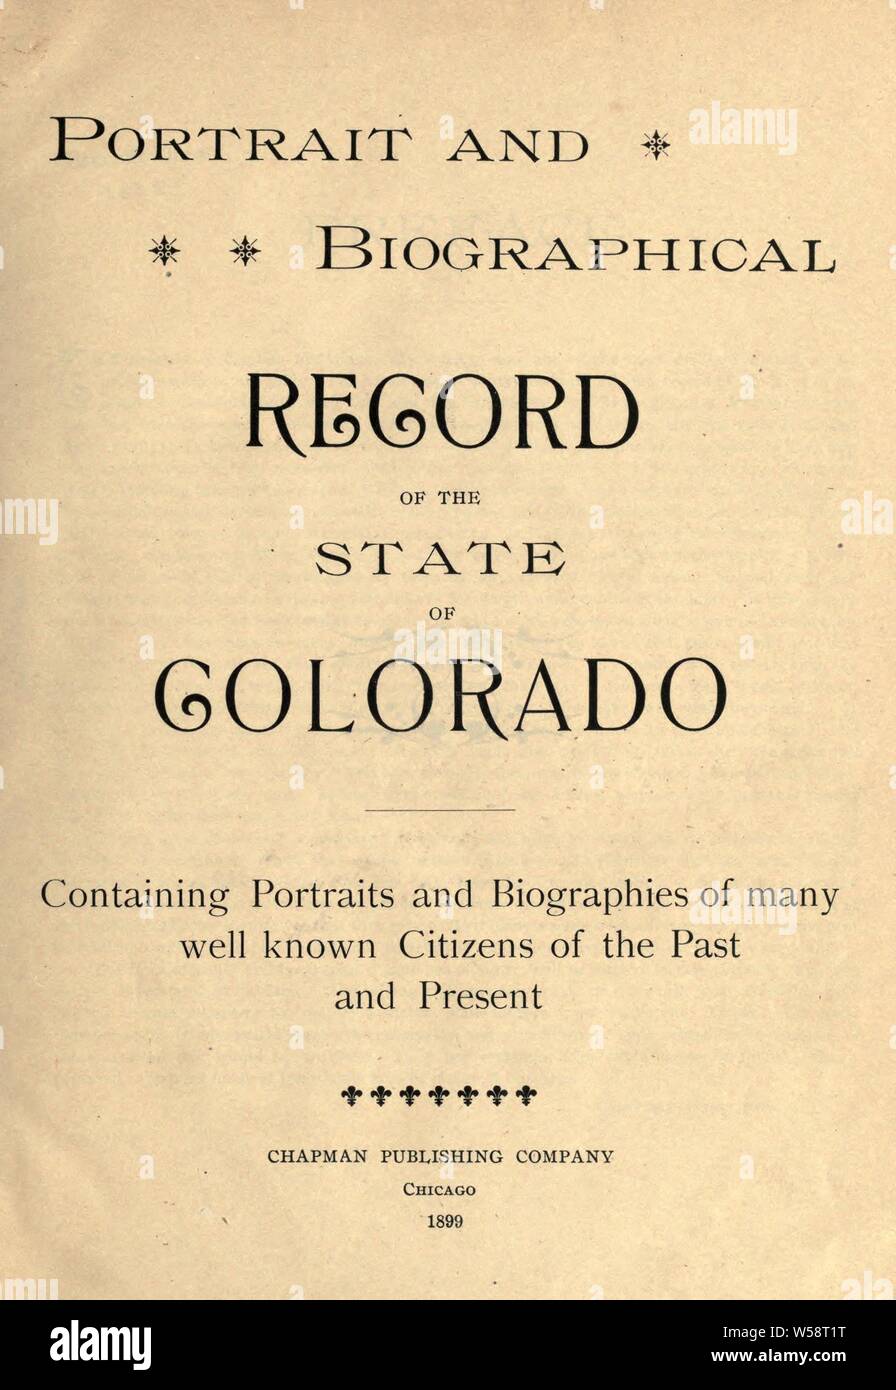 Portrait and biographical record of the state of Colorado : containing portraits and biographies of many well known citizens of the past and present : Chapman Publishing Company Stock Photo